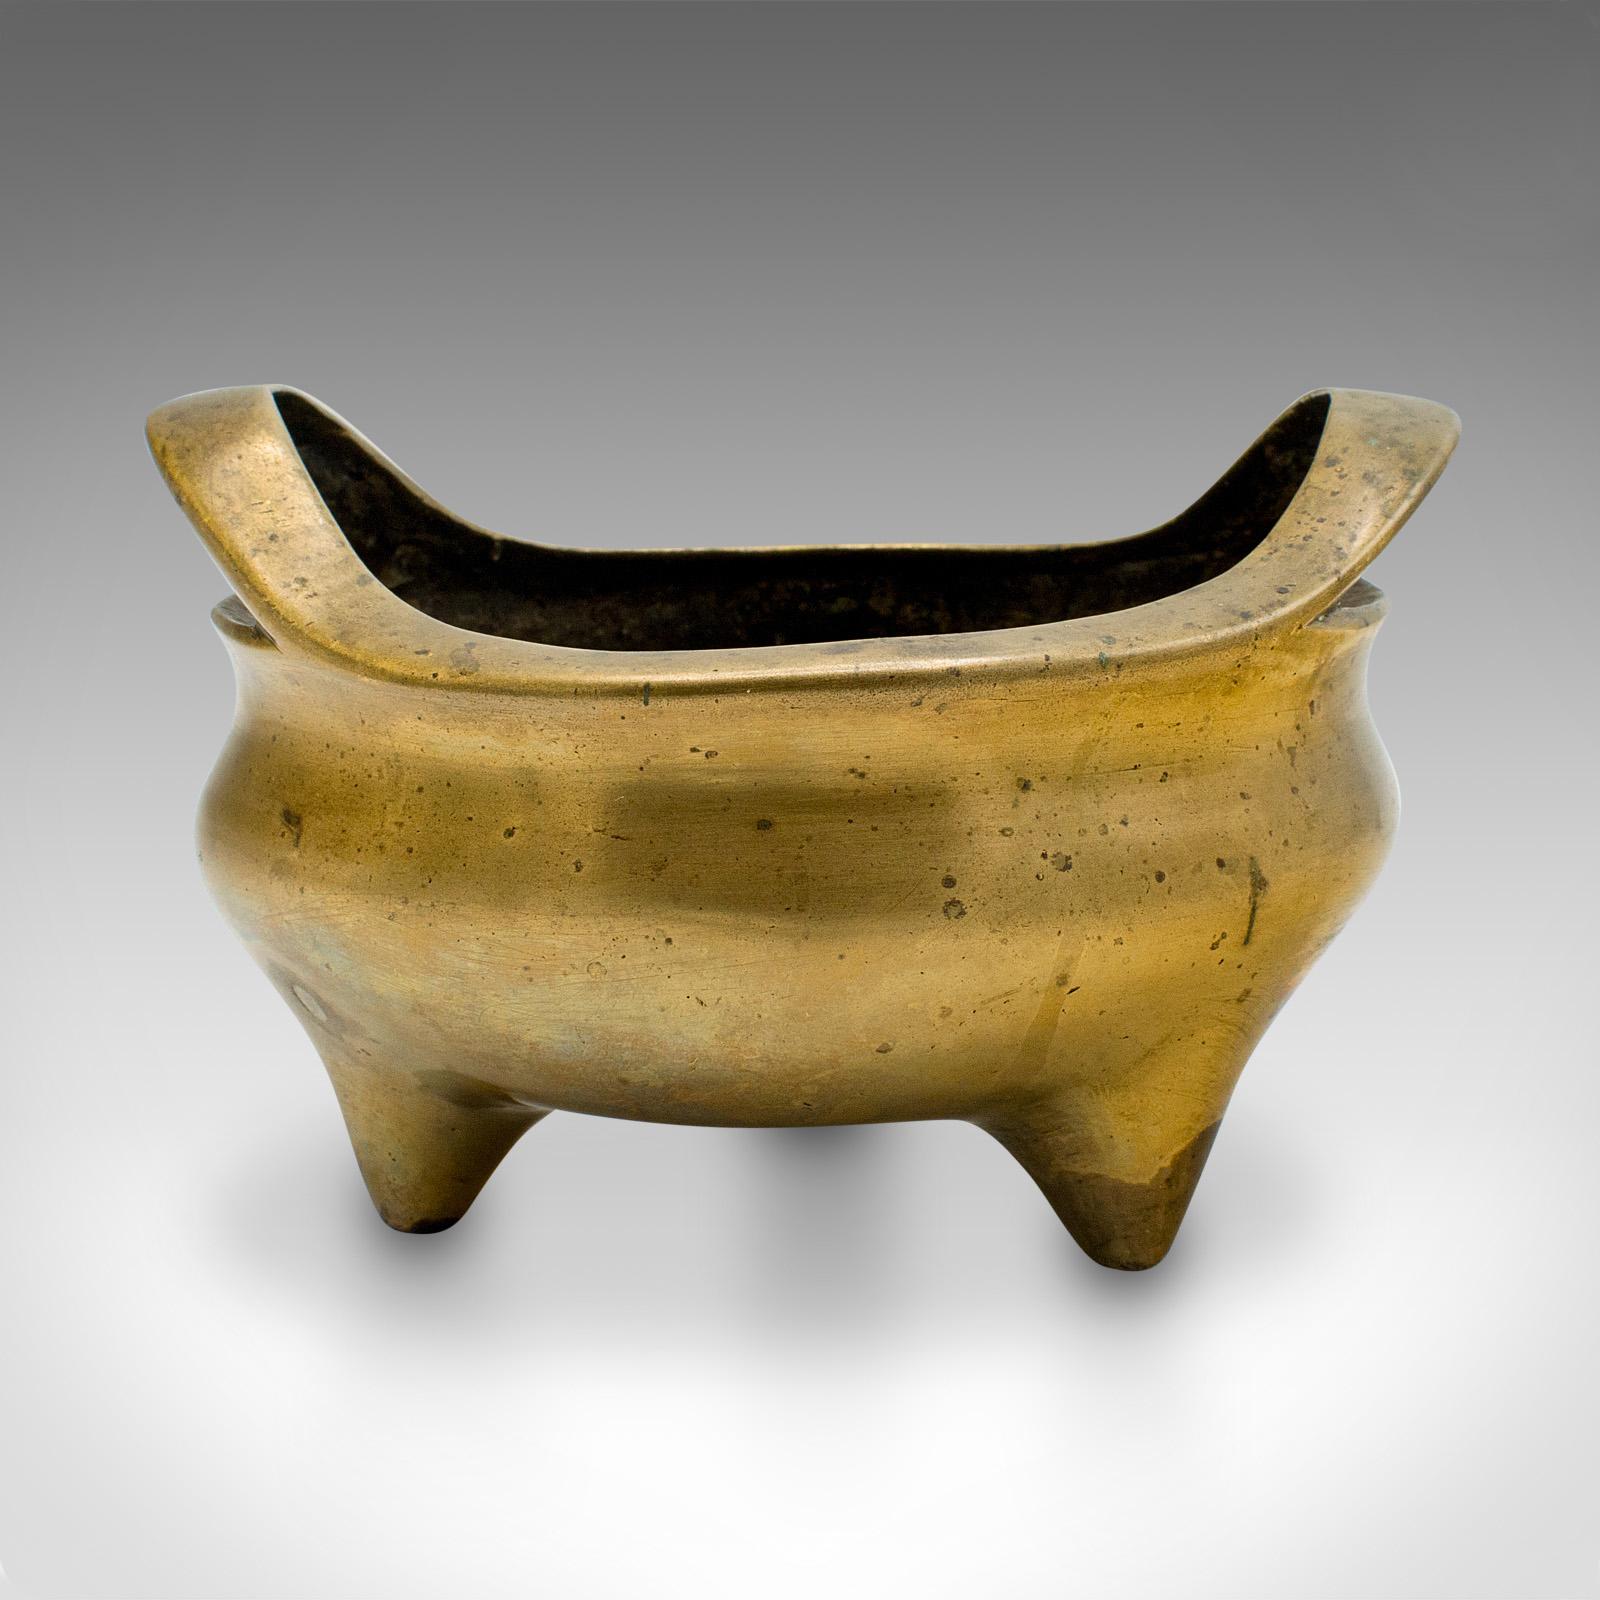 This is a antique censer. A Chinese, bronze incense burner, libation cup or dish, dating to the early Victorian, circa 1850.

Pleasingly tactile and of appealing form
Displays a desirable aged patina and in good order
Lightly polished bronze